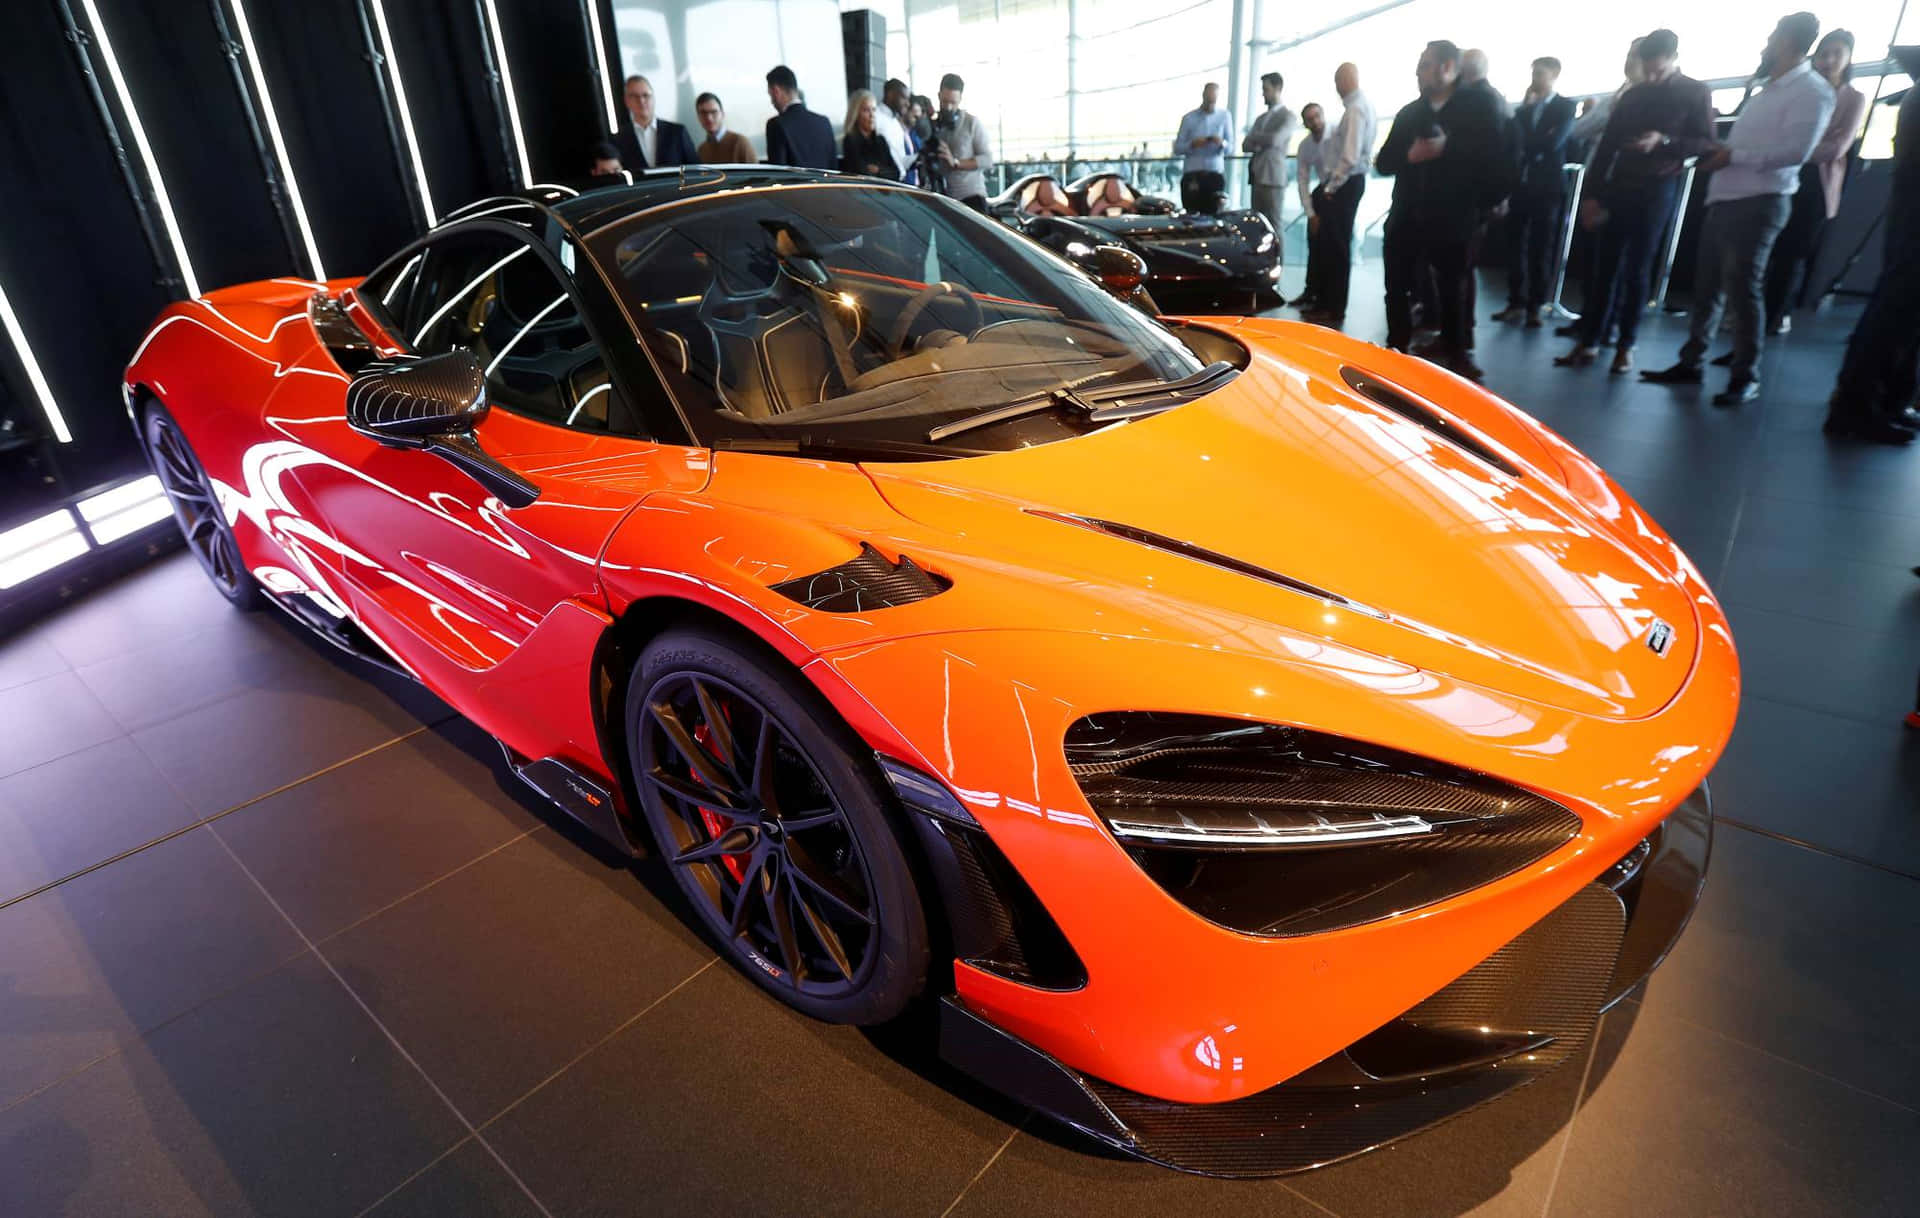 Feel the power of the Mclaren 720SGT on the track.